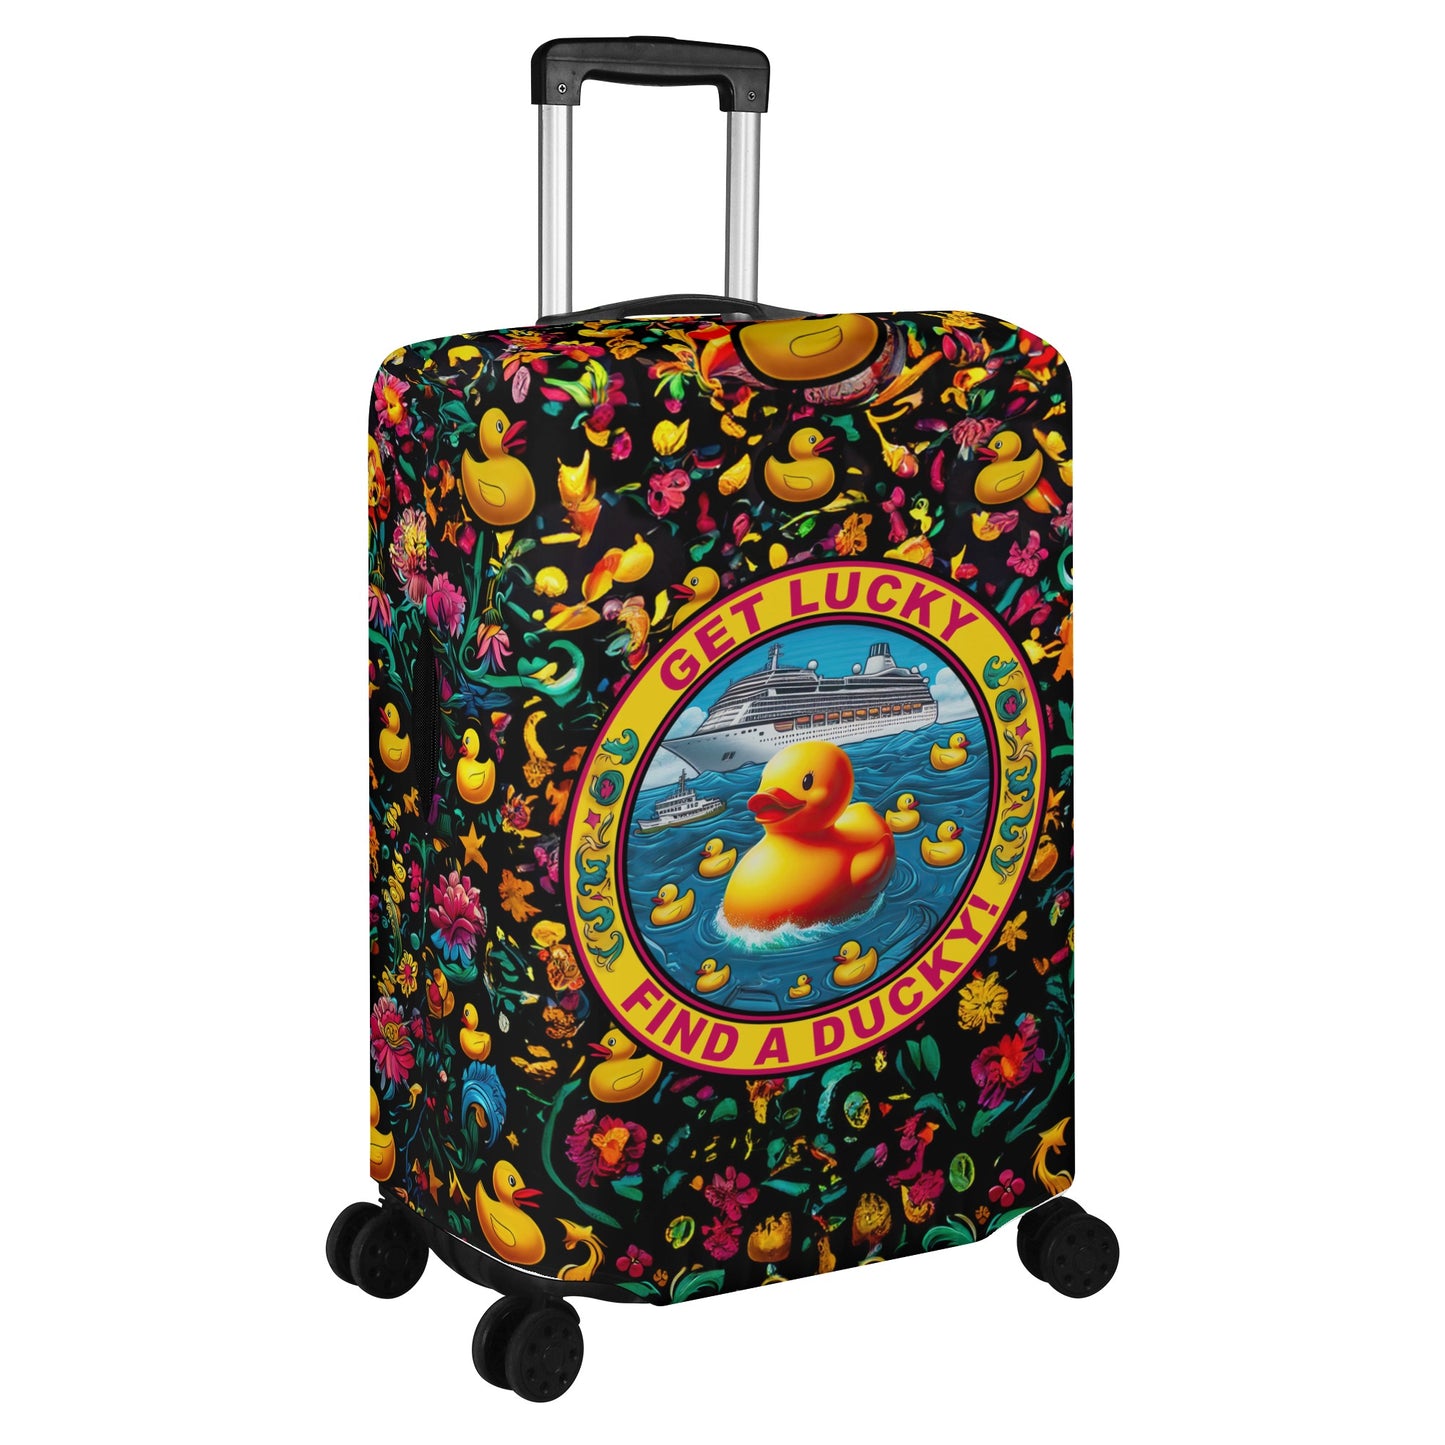 Get Lucky, Find a Ducky Luggage Cover